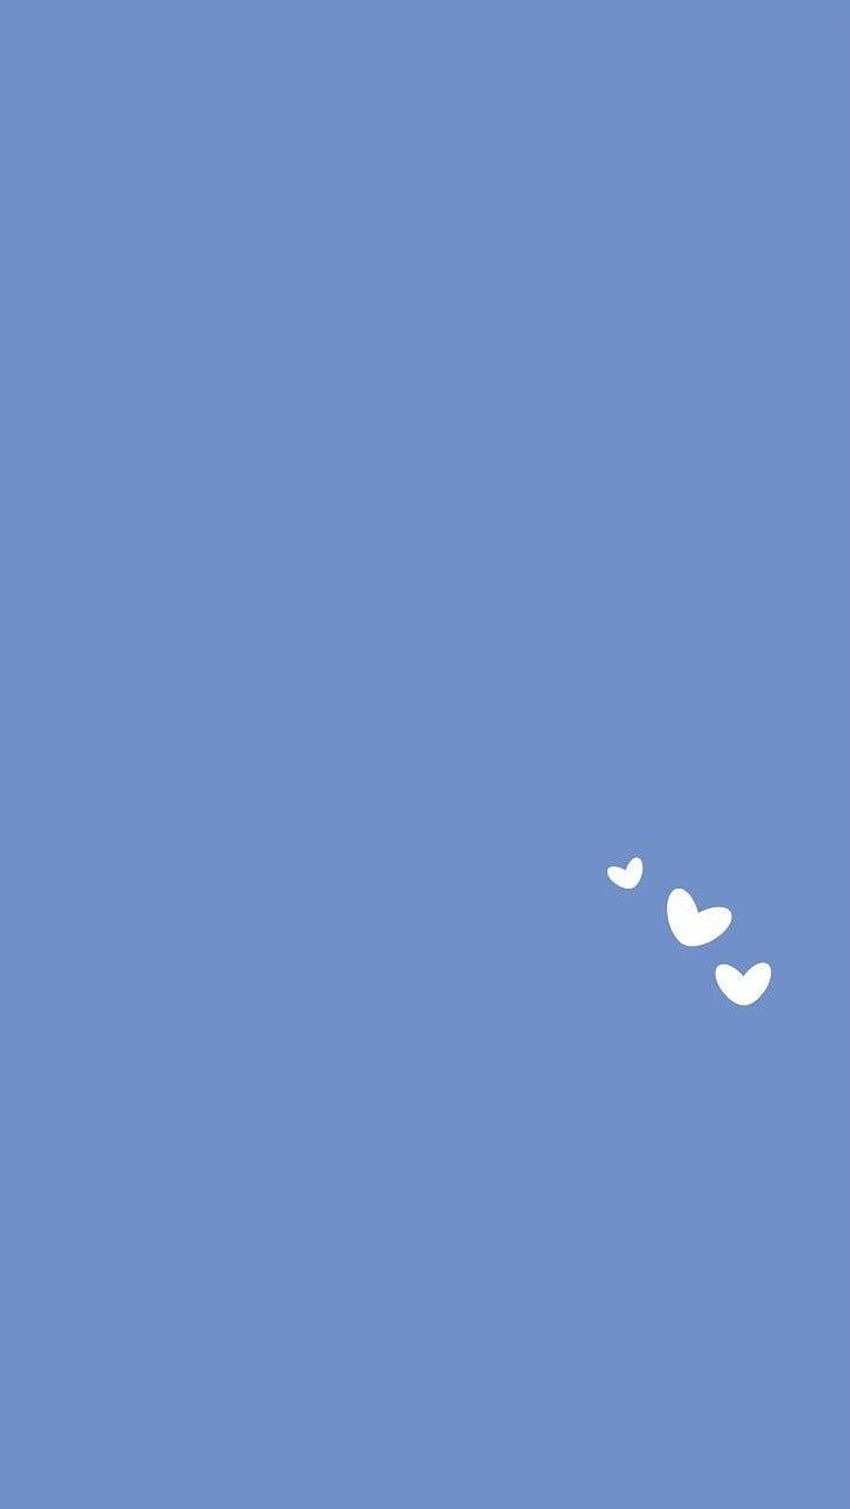 Aesthetic iPhone Pastel Background. Background tumblr, iphone cute, Simple, Simple Blue Phone HD phone wallpaper